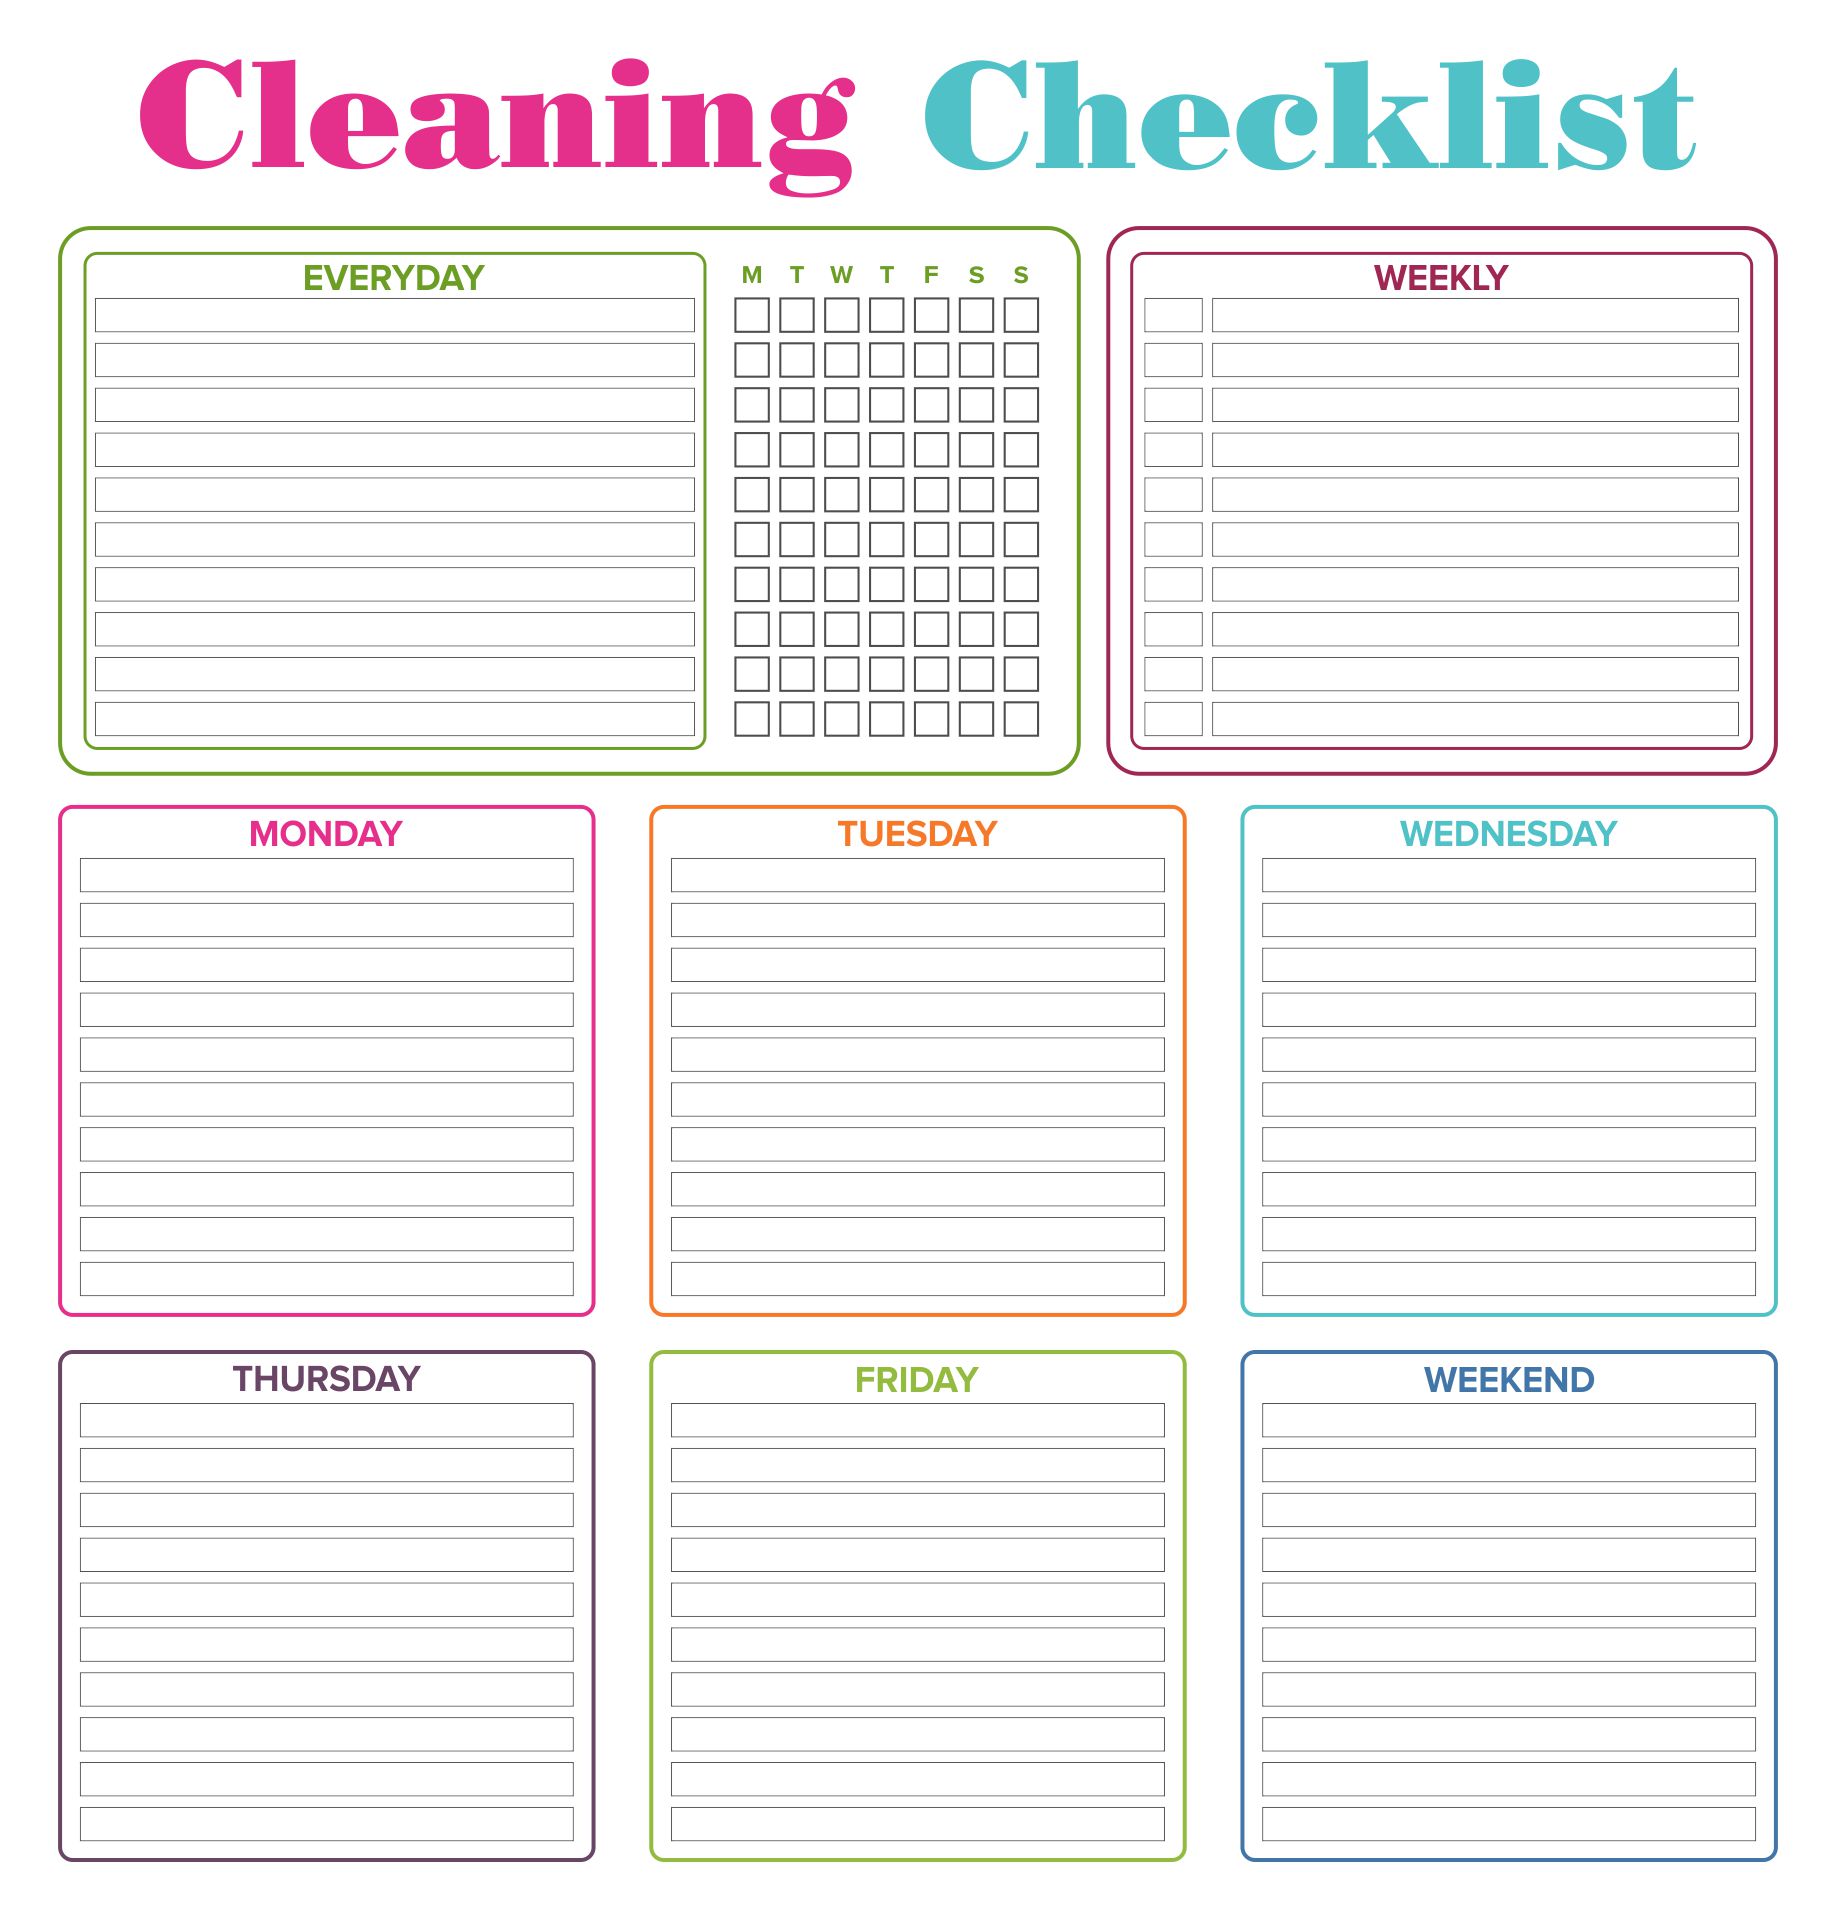 8-best-images-of-daily-cleaning-checklist-printable-daily-house